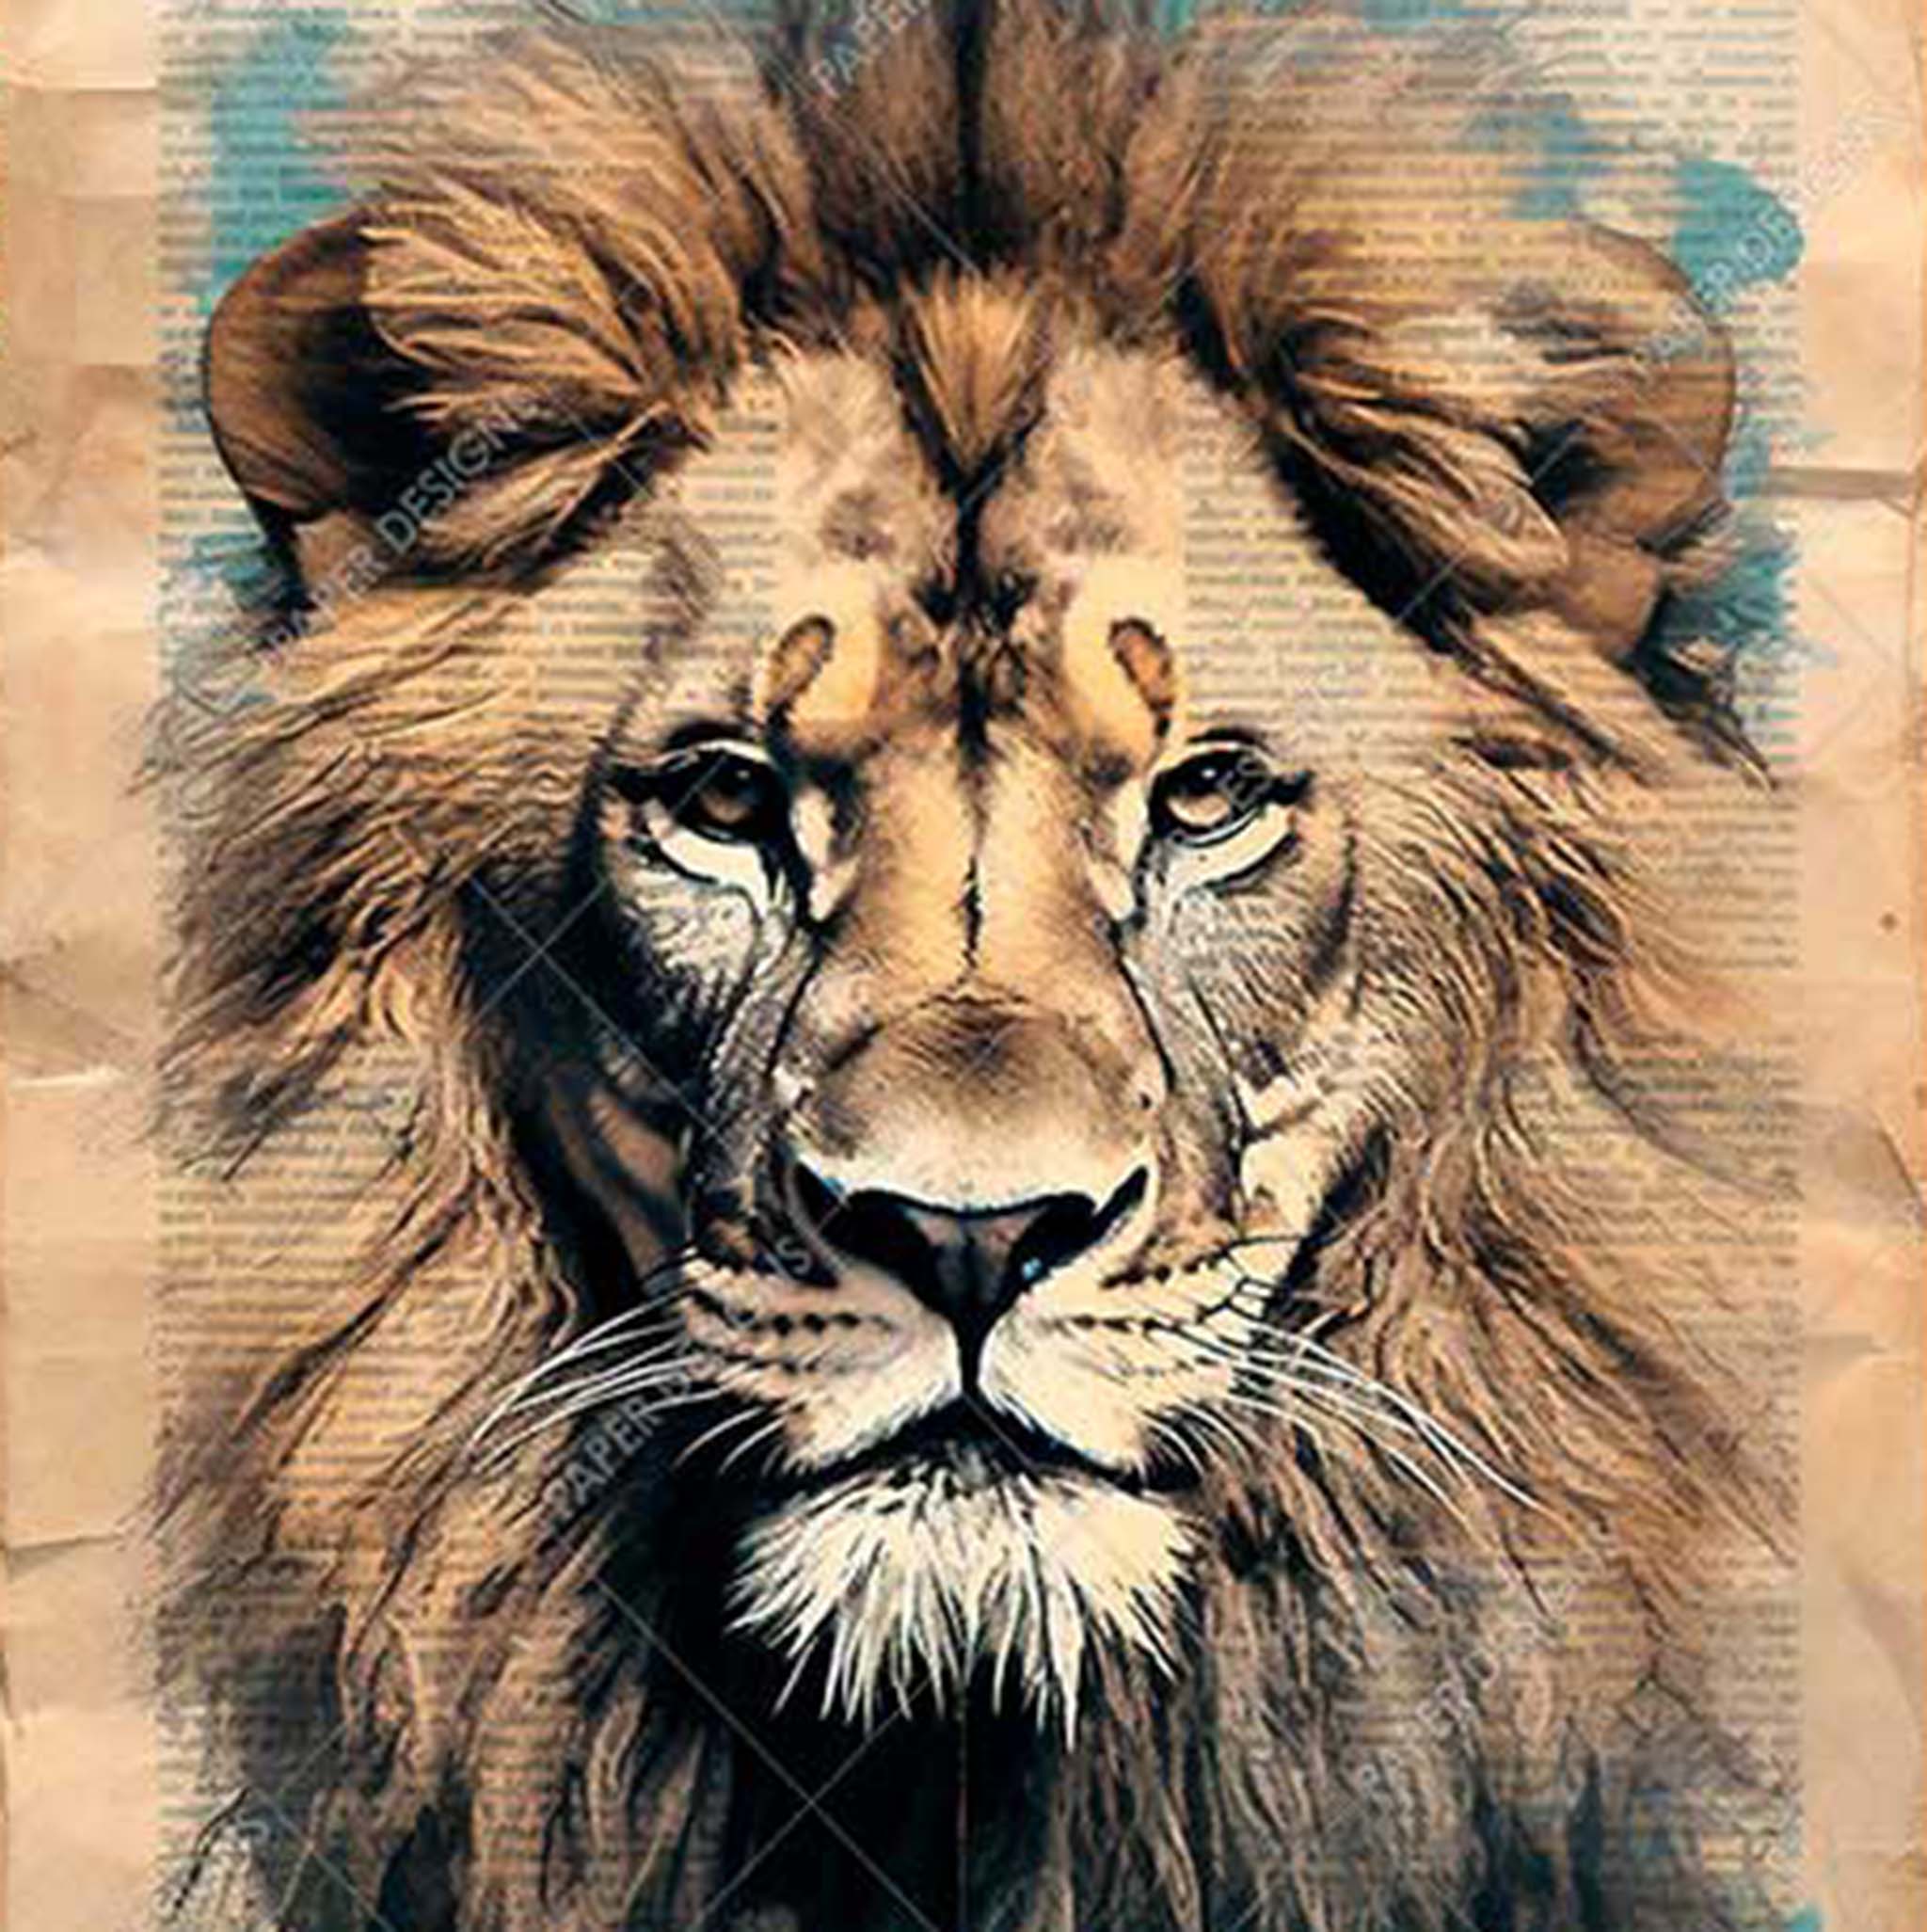 A0 rice paper design that features a vintage sepia tone background and a majestic lion.